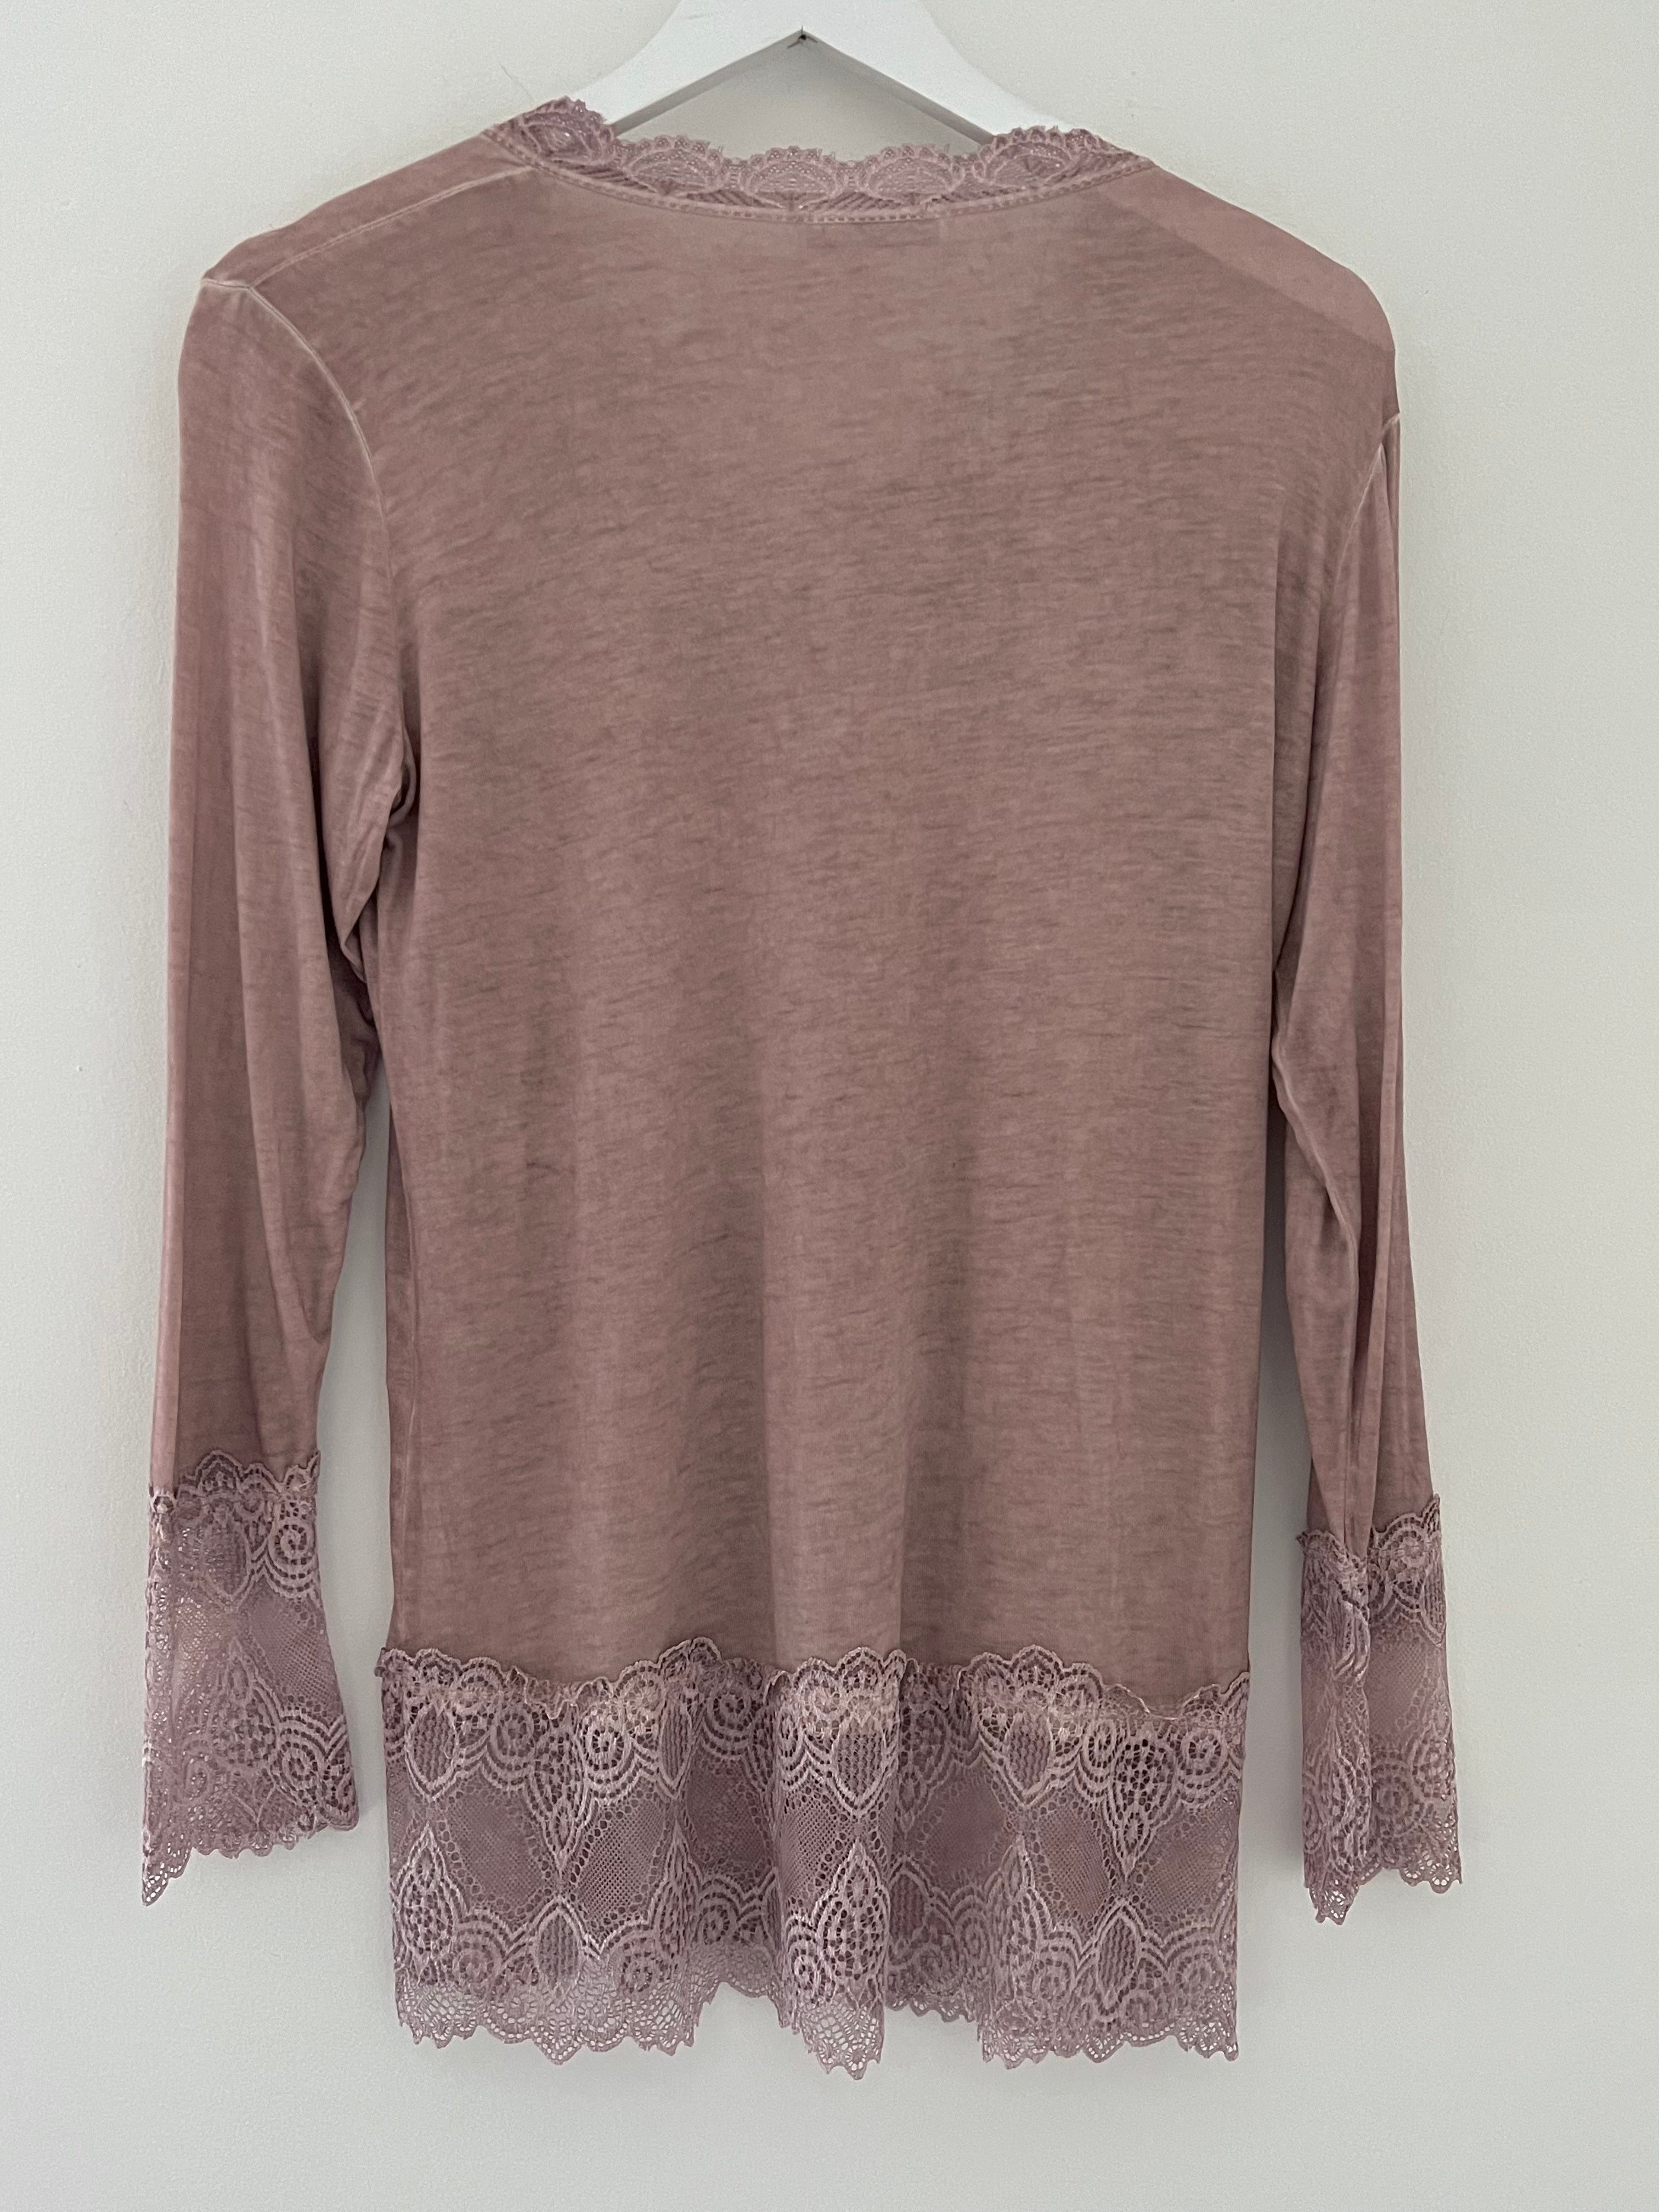 Luxe Base Top with Lace Trim in Soft Pink